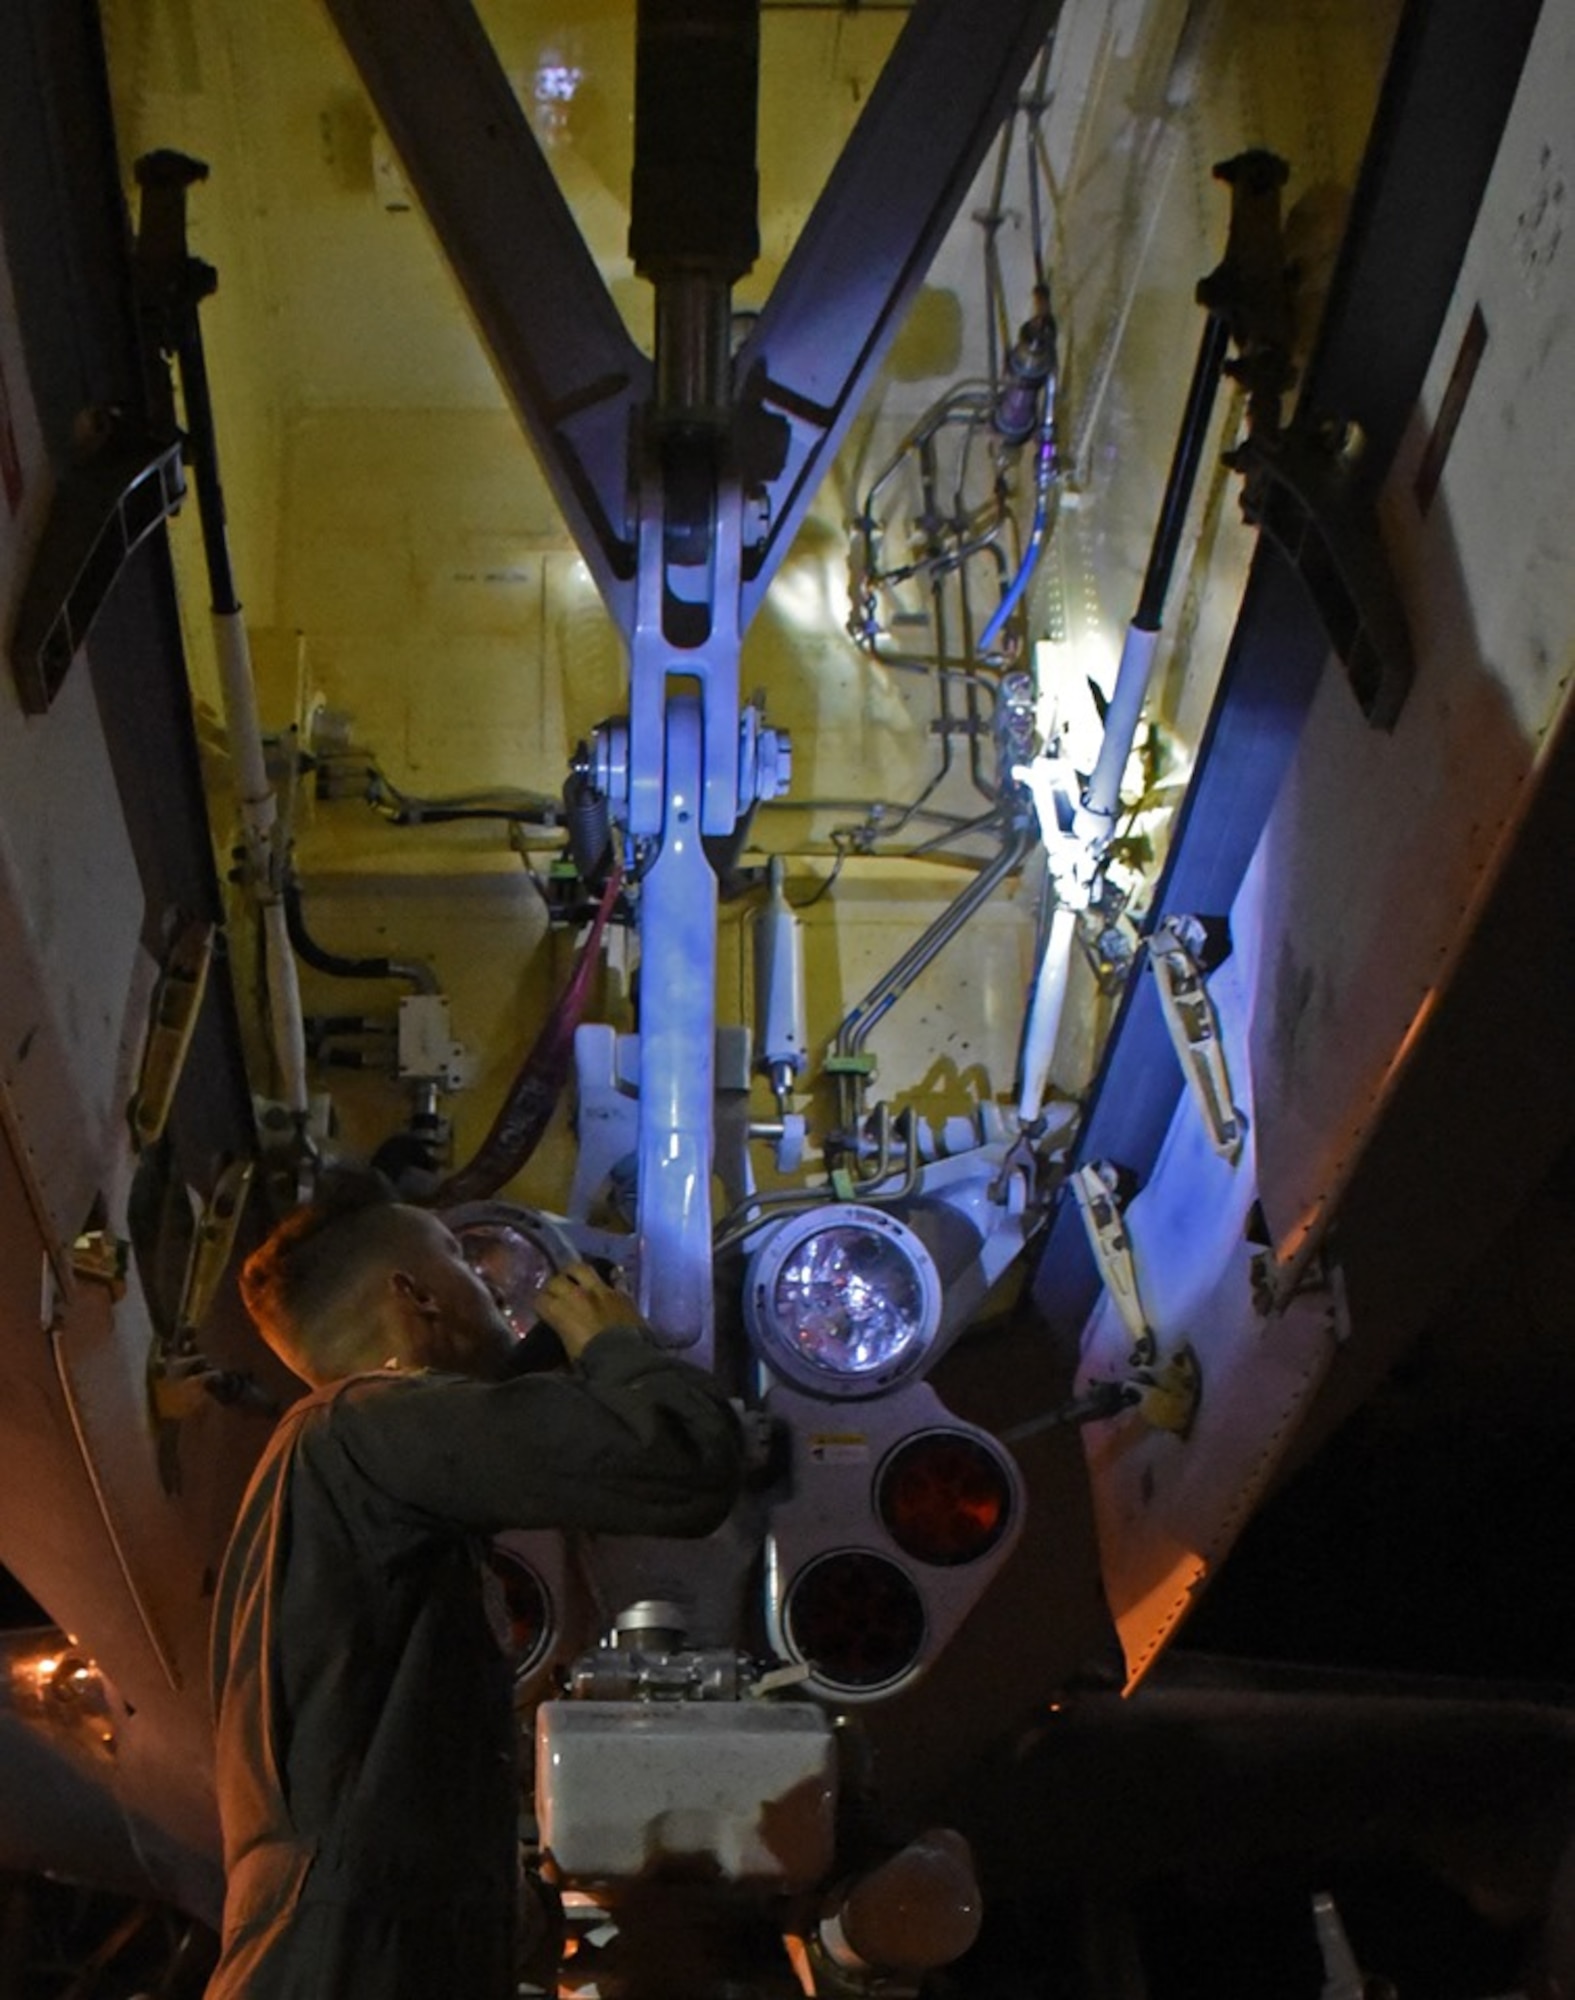 U.S. Air Force Staff Sgt. Eric Yates, 22nd Aircraft Maintenance Squadron crew chief from McConnell Air Force Base, Kansas, conducts a post-flight check of a KC-46 Pegasus Aug. 21, 2019, at Travis AFB, California. Yates, along with the rest of the KC-46 crew, worked with Travis' 60th Aerial Port Squadron to load the aircraft with life rafts and other cargo for the U.S. Navy's USS Port Royal. (U.S. Air Force photo by Senior Airman Christian Conrad)